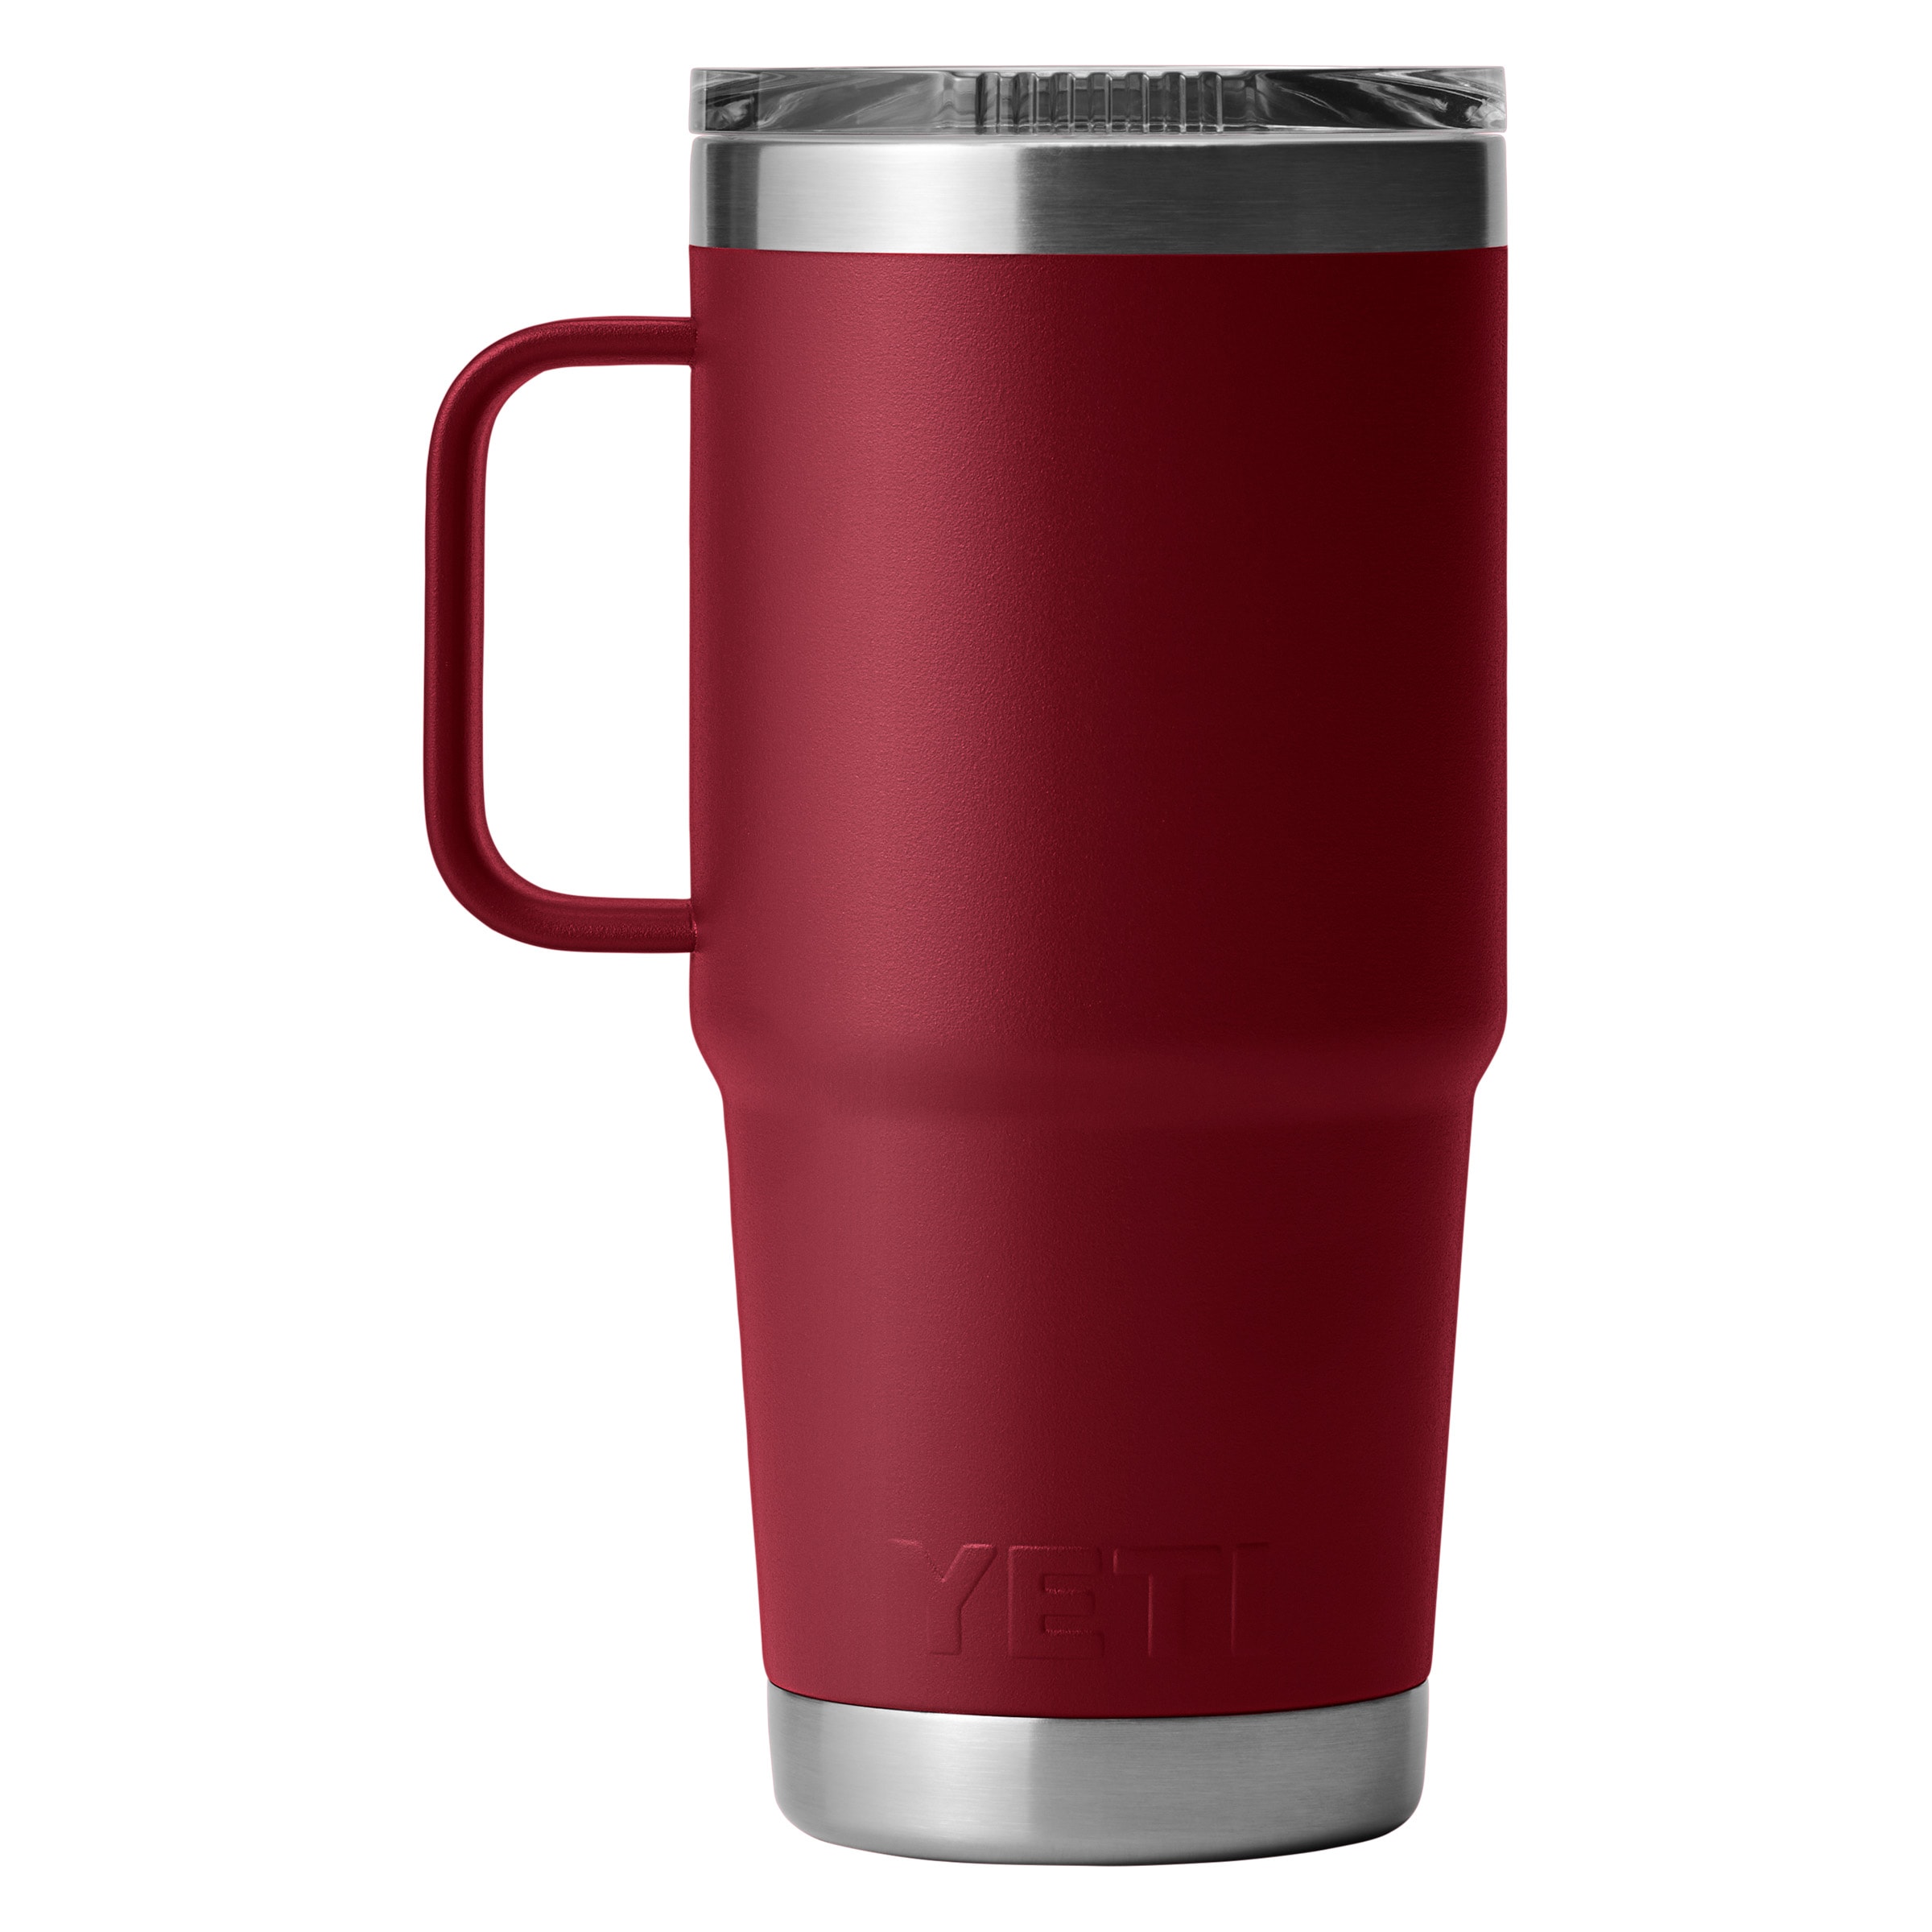 YETI Rambler 20 oz Travel Mug, Stainless Steel, Vacuum Insulated with  Stronghold Lid. 